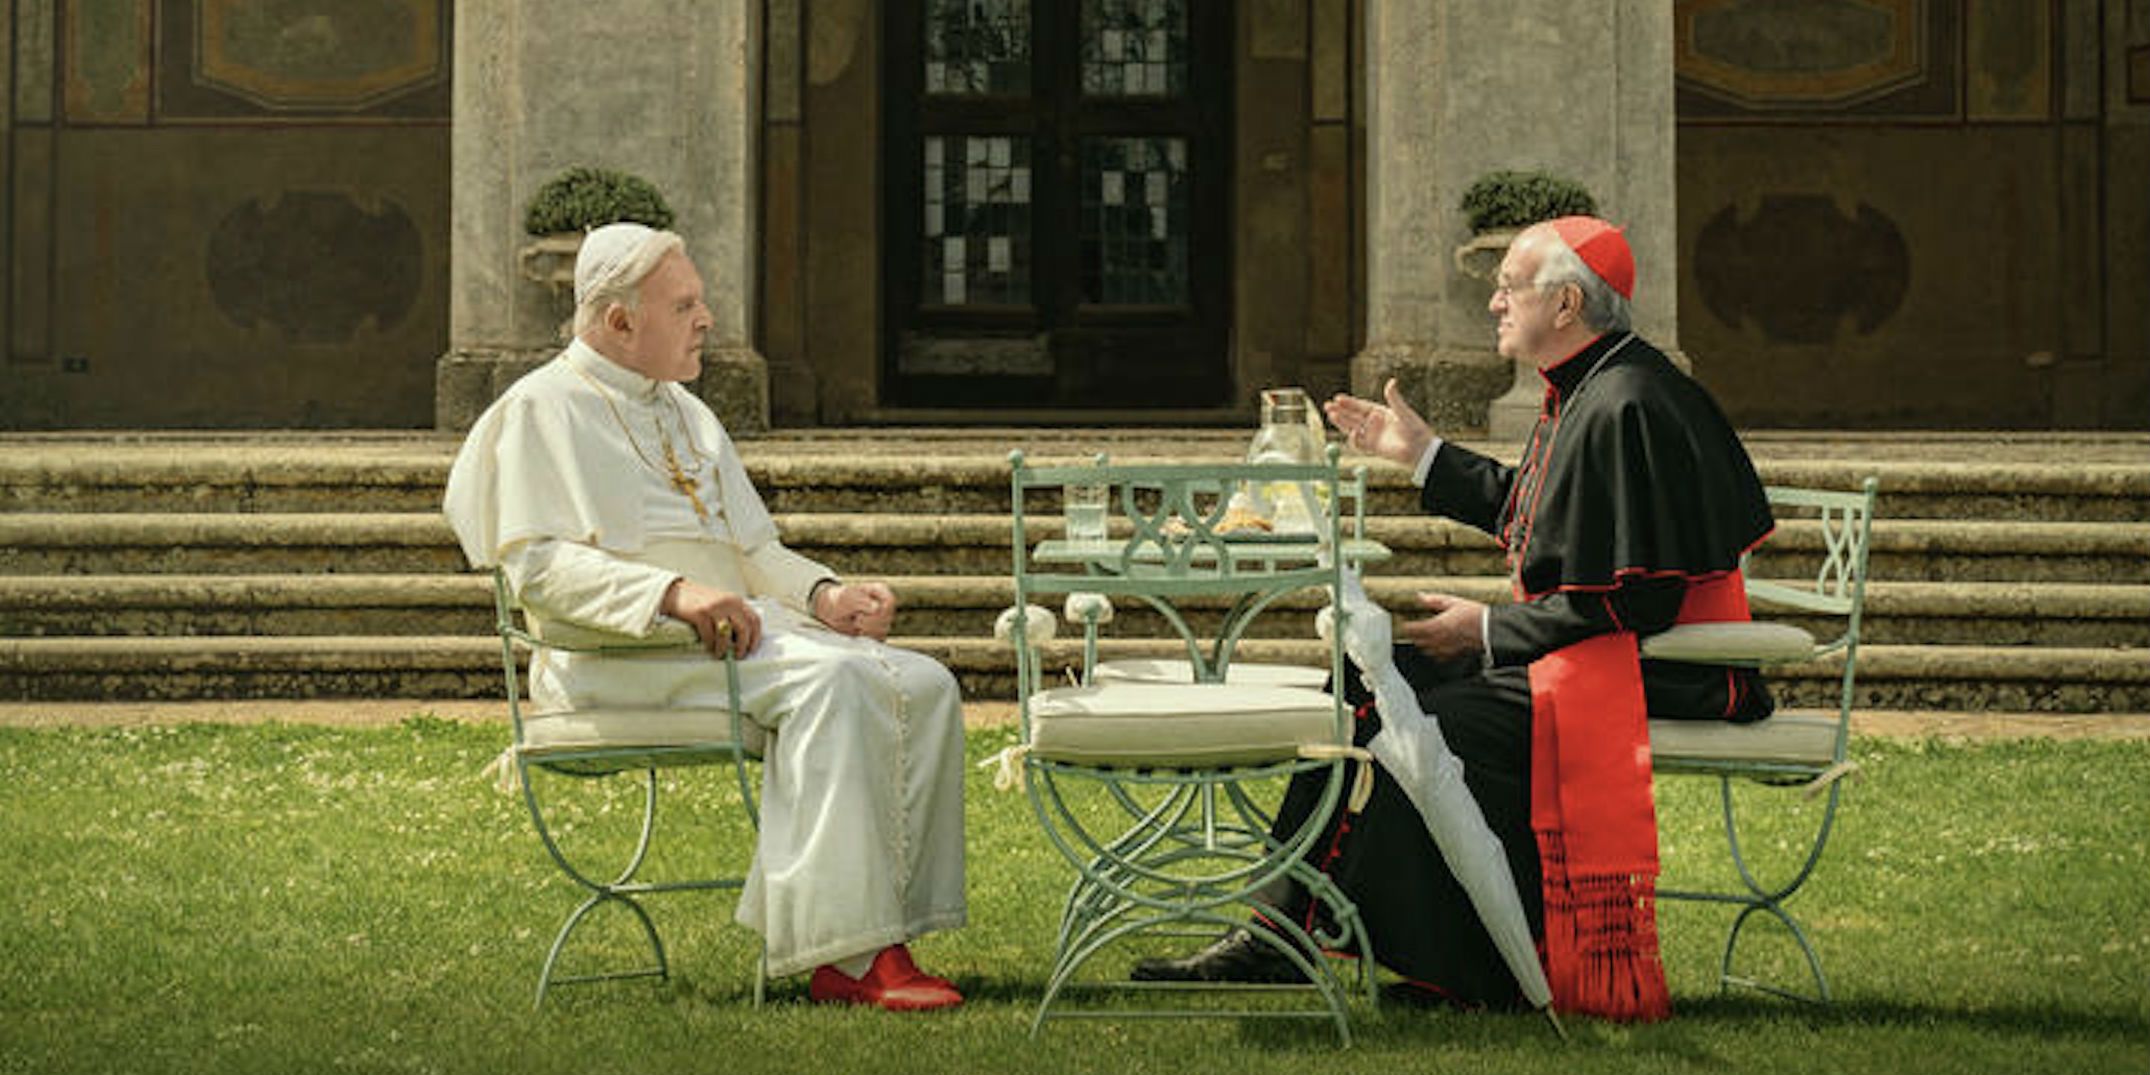 Pope Benedict and Pope Francis have breakfast in The Two Popes